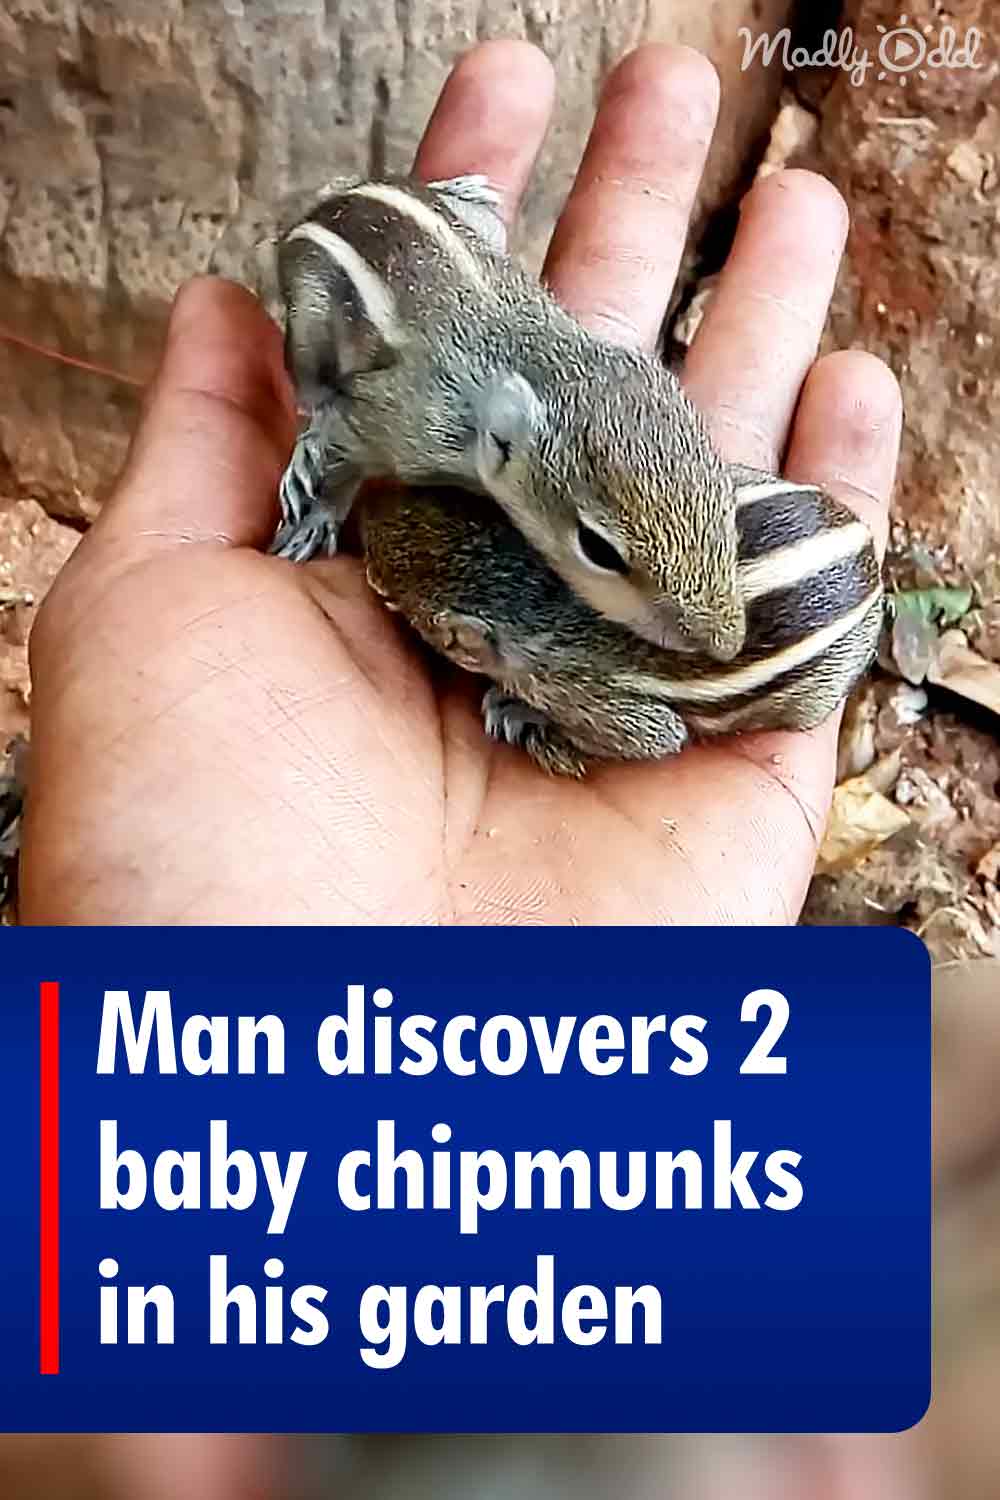 Man discovers 2 baby chipmunks in his garden